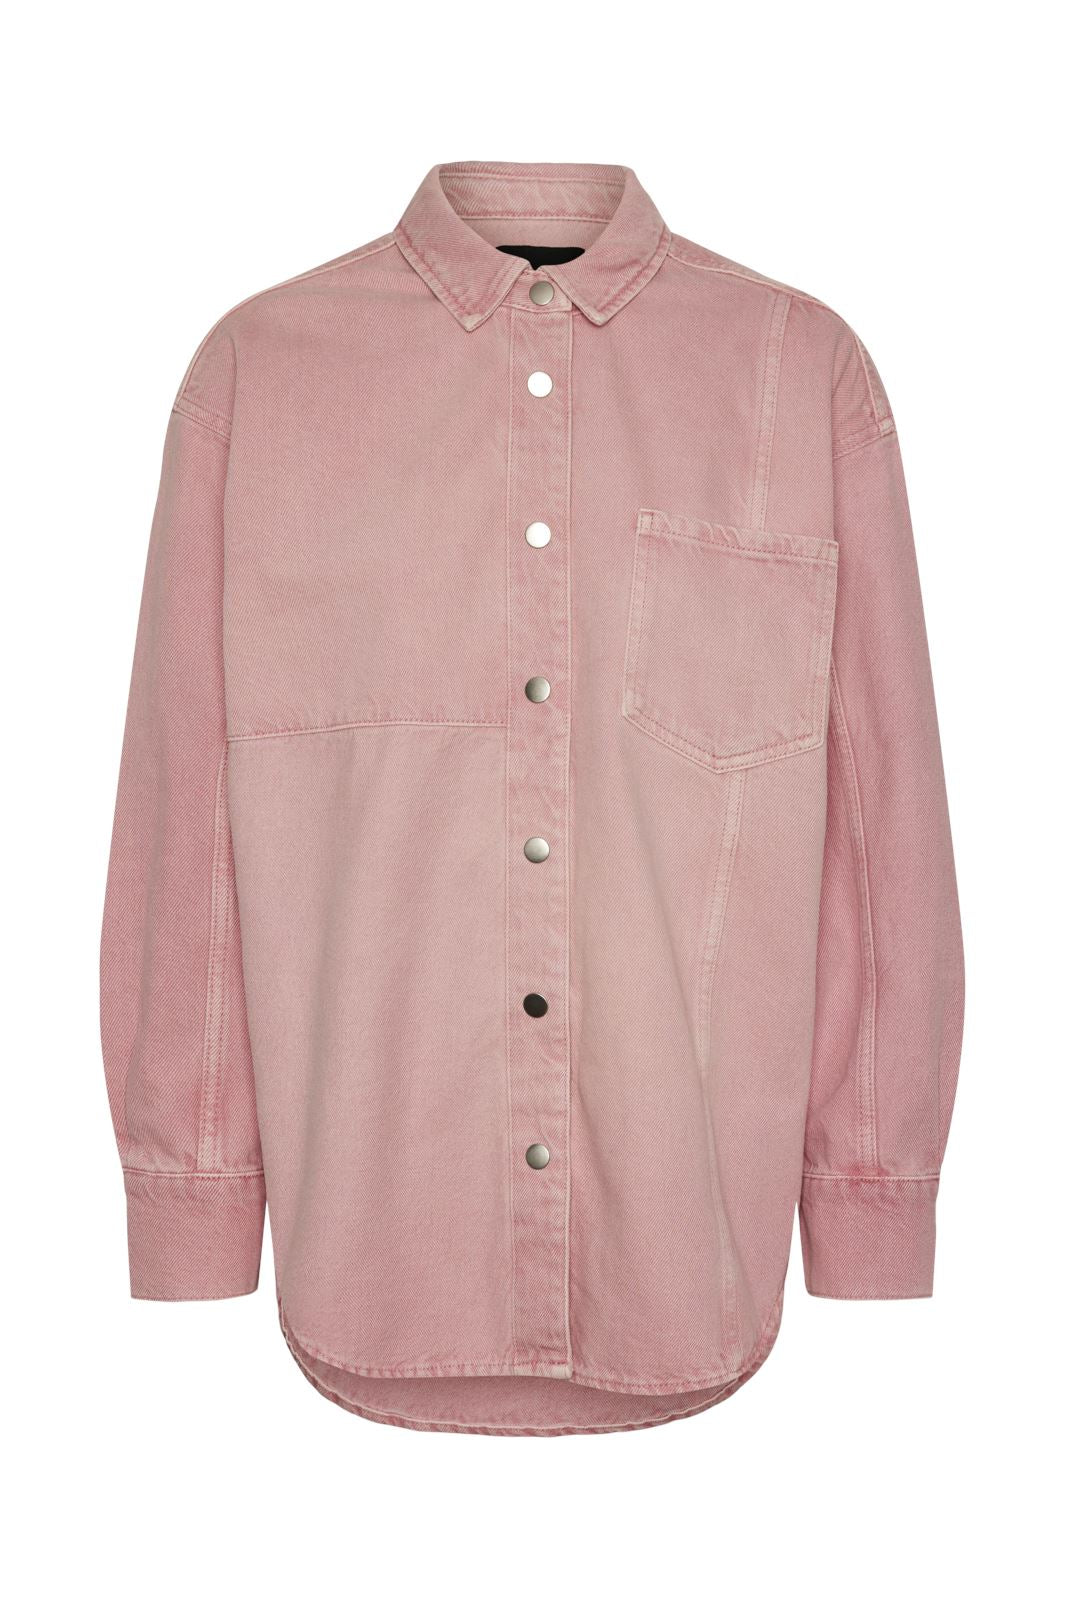 Pieces - Pcfria Ls Denim Shirt - 4584197 Candy Pink Washed